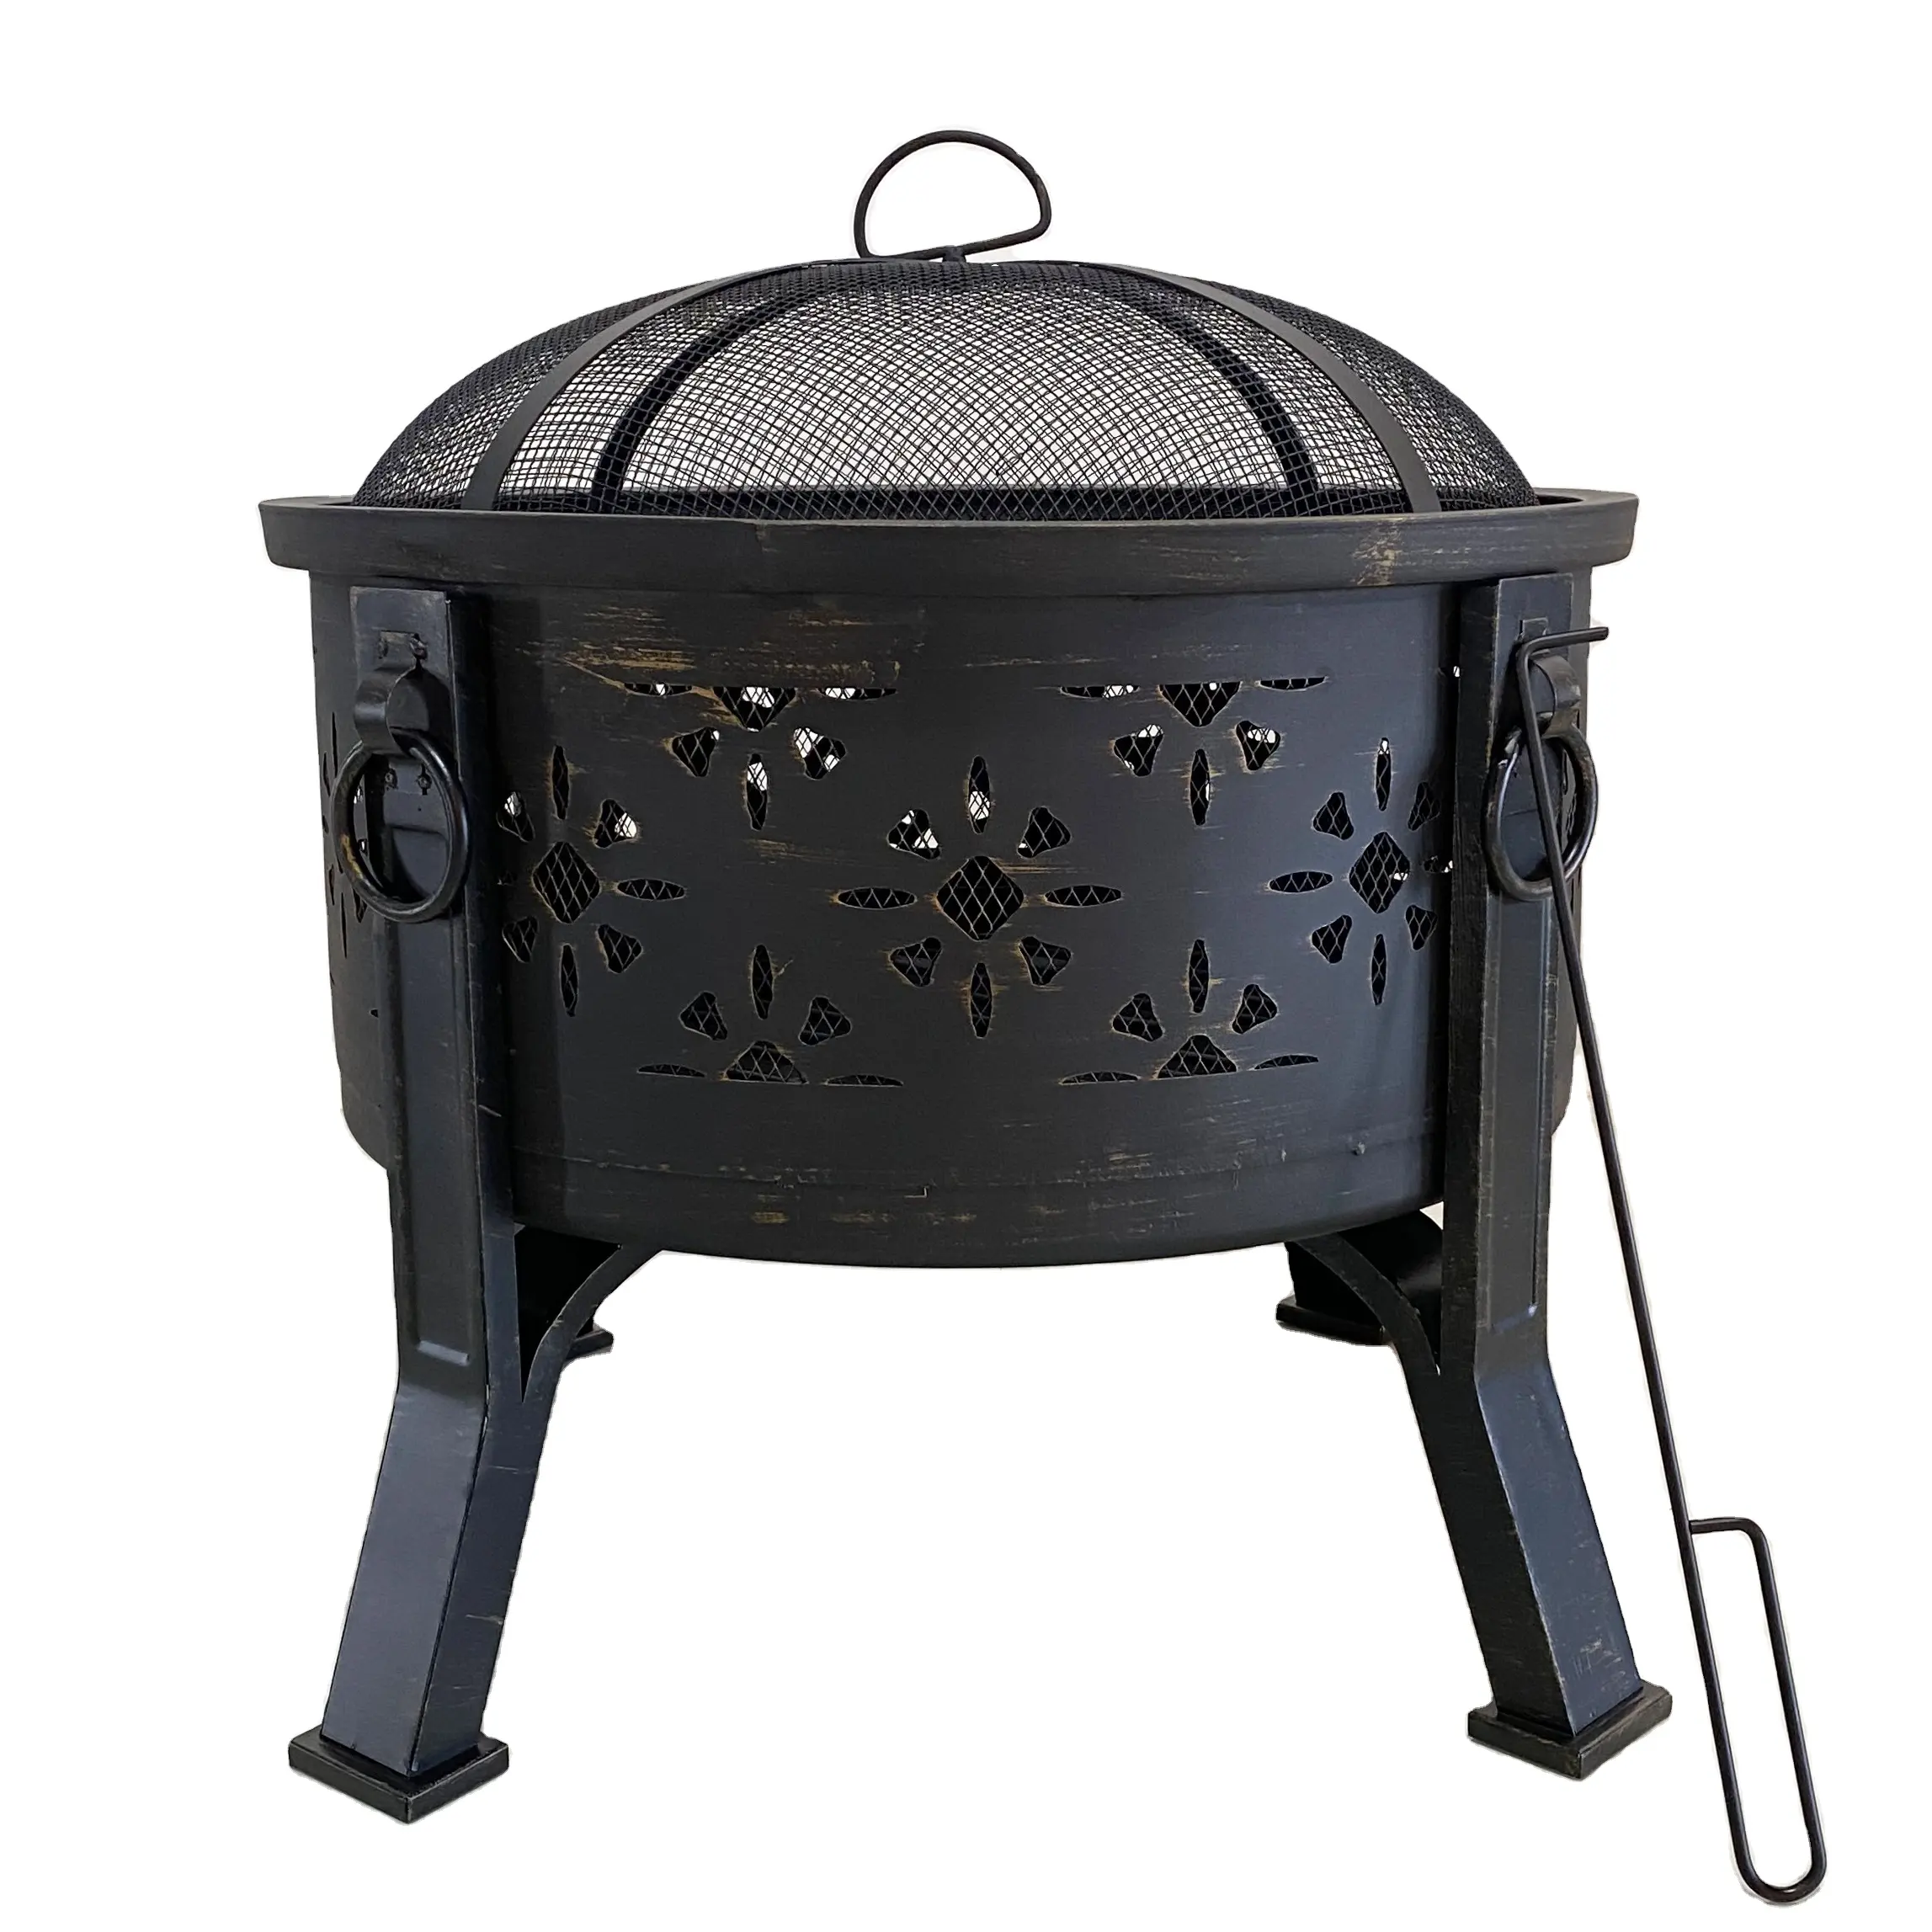 BBQ Pit Outdoor Camping Fire Pit for Garden Barbecue